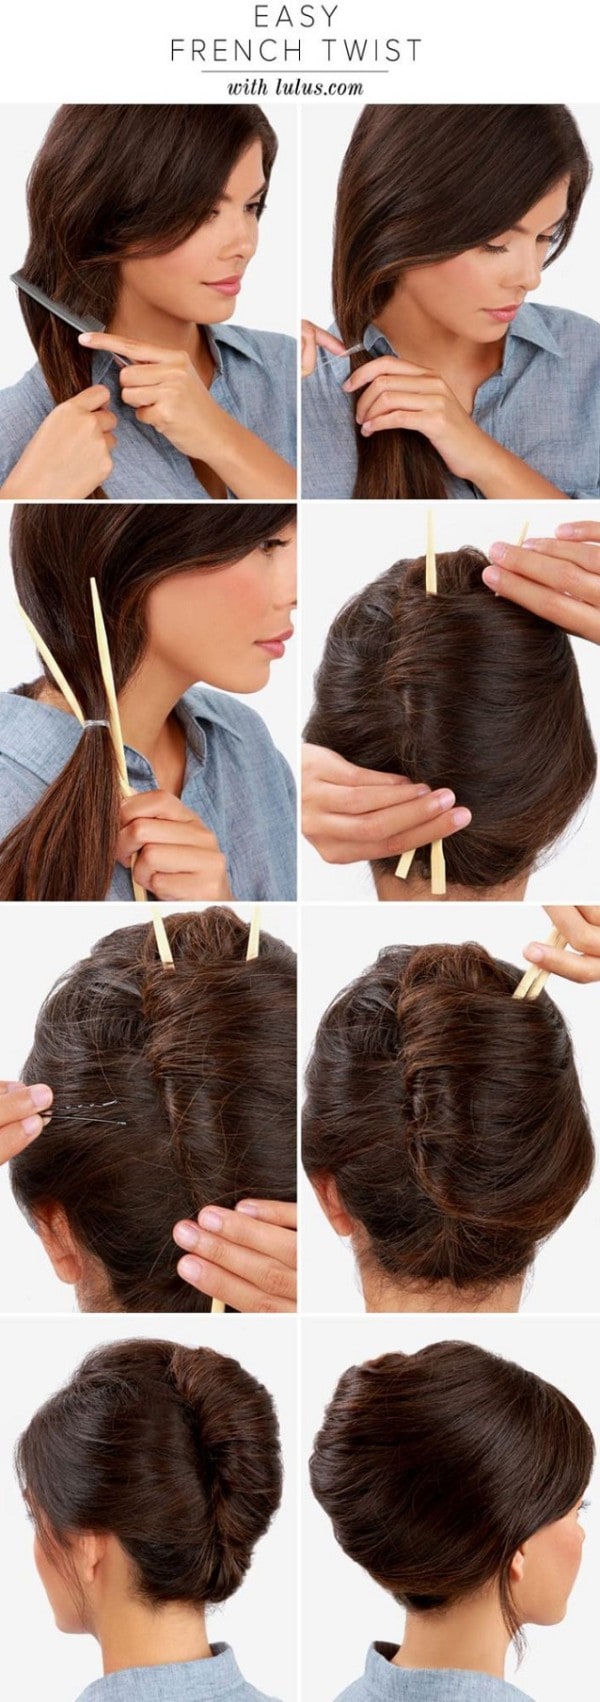 10 Super Creative Tips How To Do Perfect Hairstyle On The Easiest Way